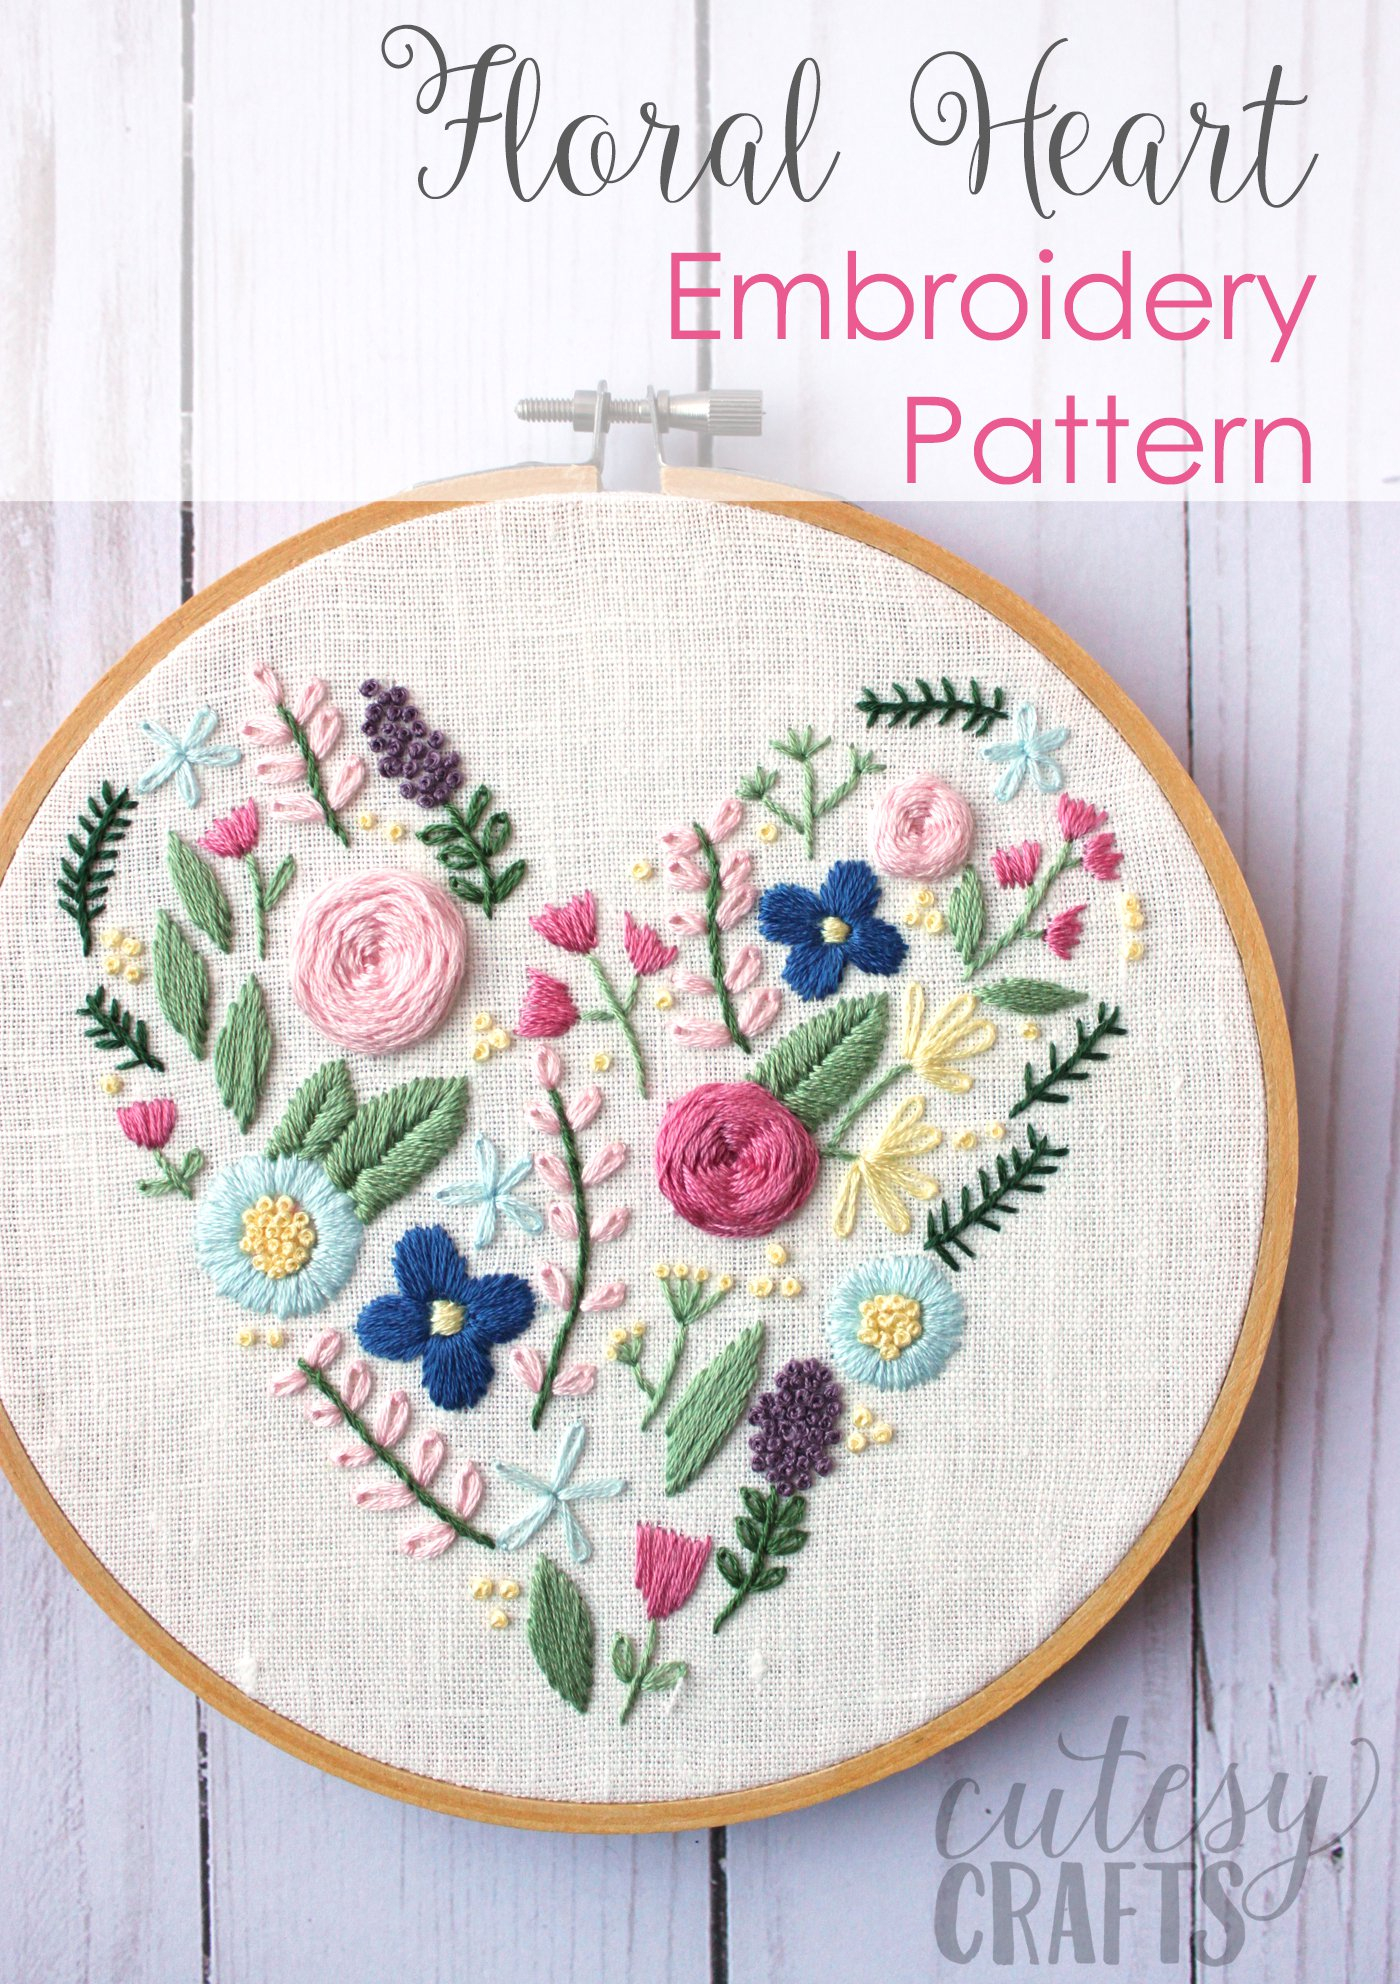 How To Make Hand Embroidery Patterns Floral Heart Hand Embroidery Pattern The Polka Dot Chair